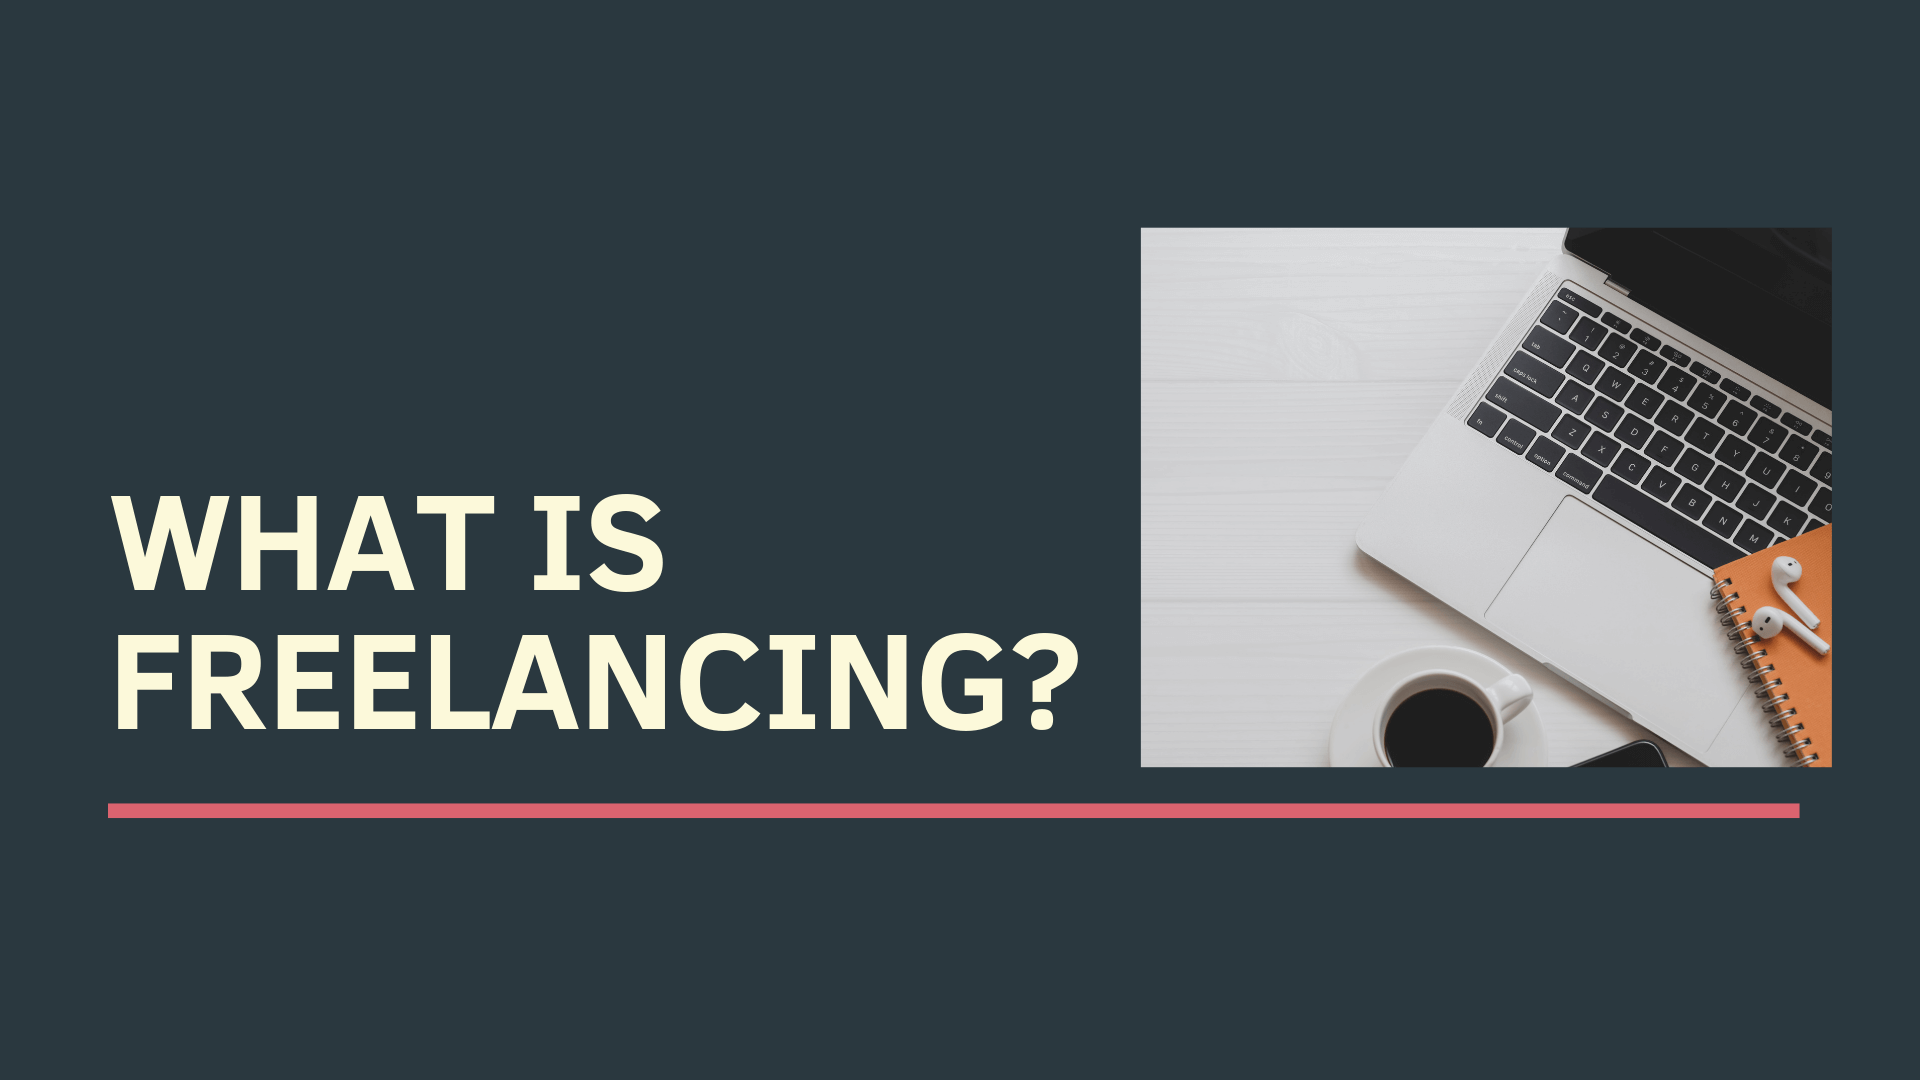 What Is Freelancing?